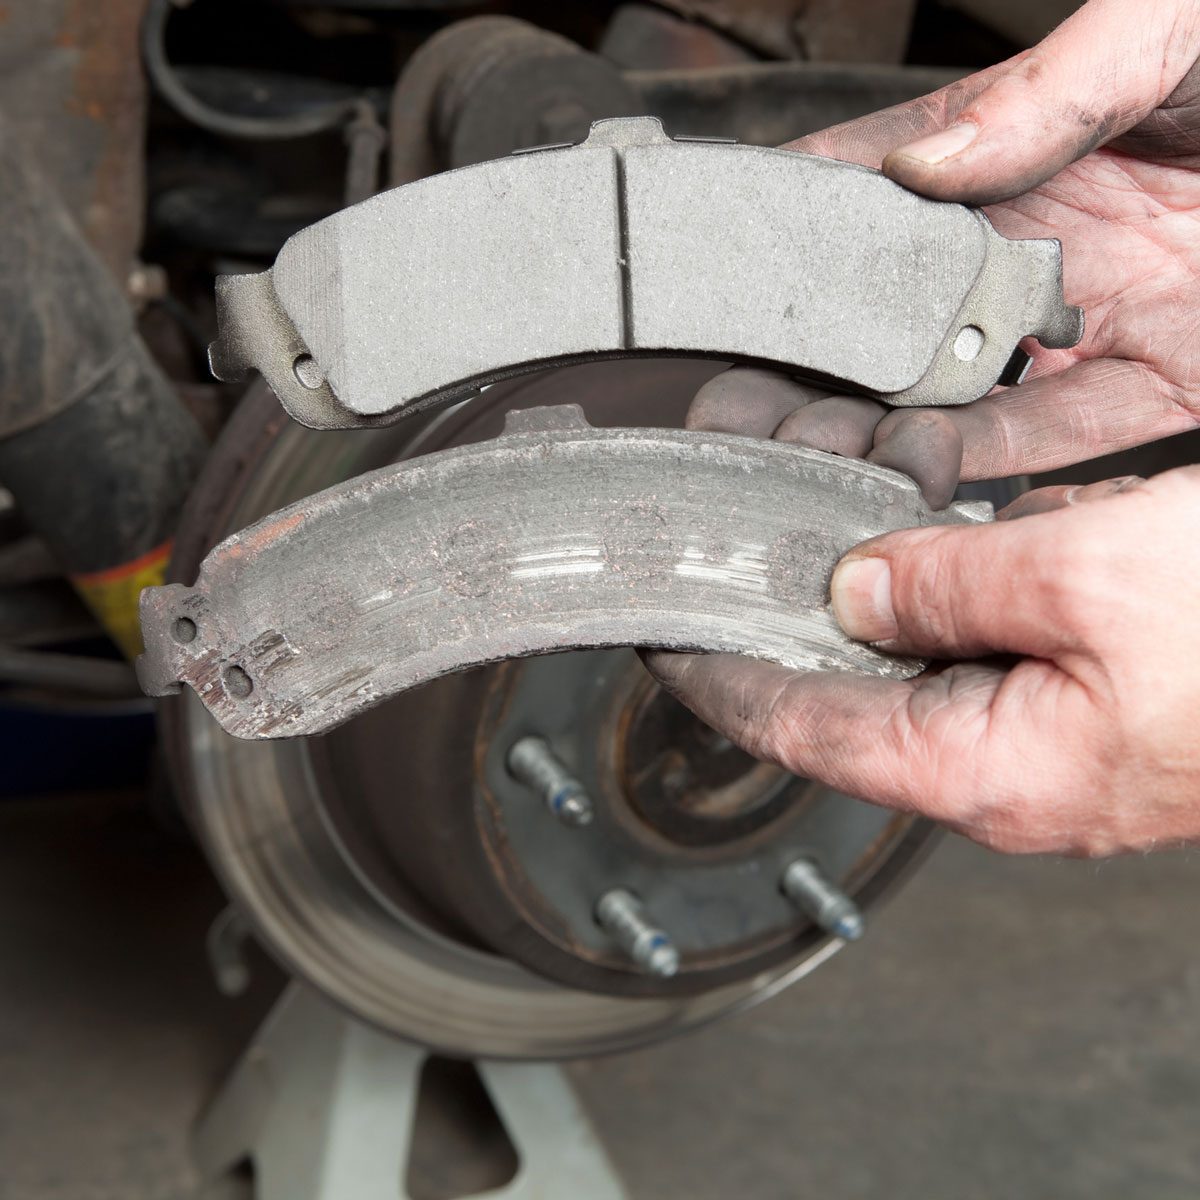 How Thin Can Brake Pads Get Before Replacing?